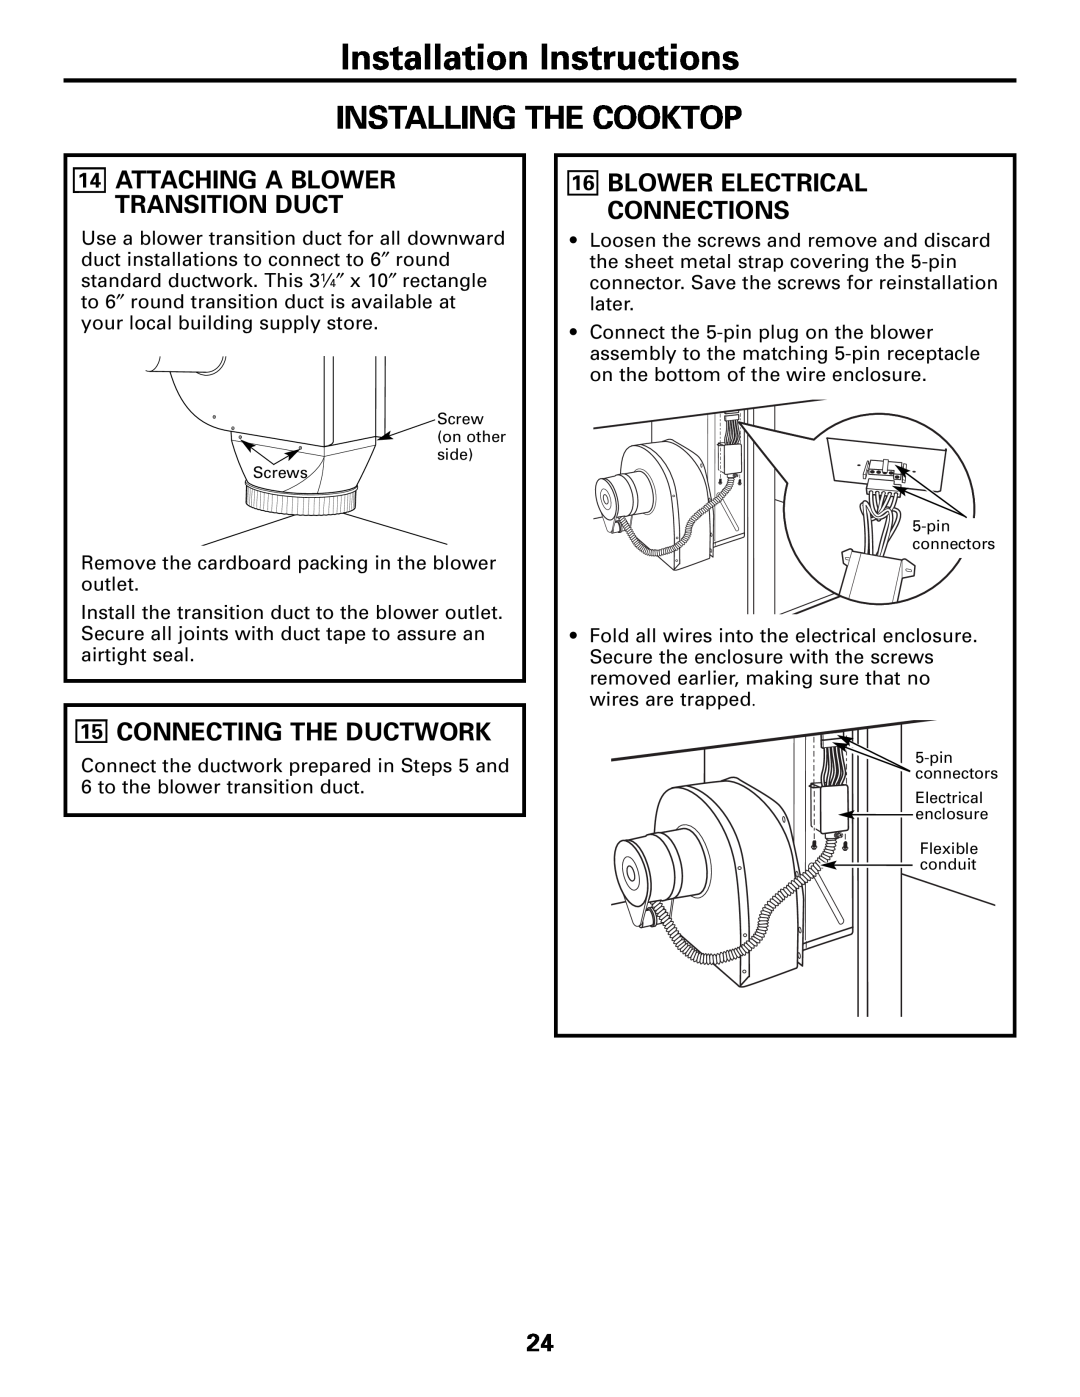 GE JP989SKSS owner manual 15CONNECTING THE DUCTWORK, 14ATTACHING A BLOWER TRANSITION DUCT, 16BLOWER ELECTRICAL CONNECTIONS 